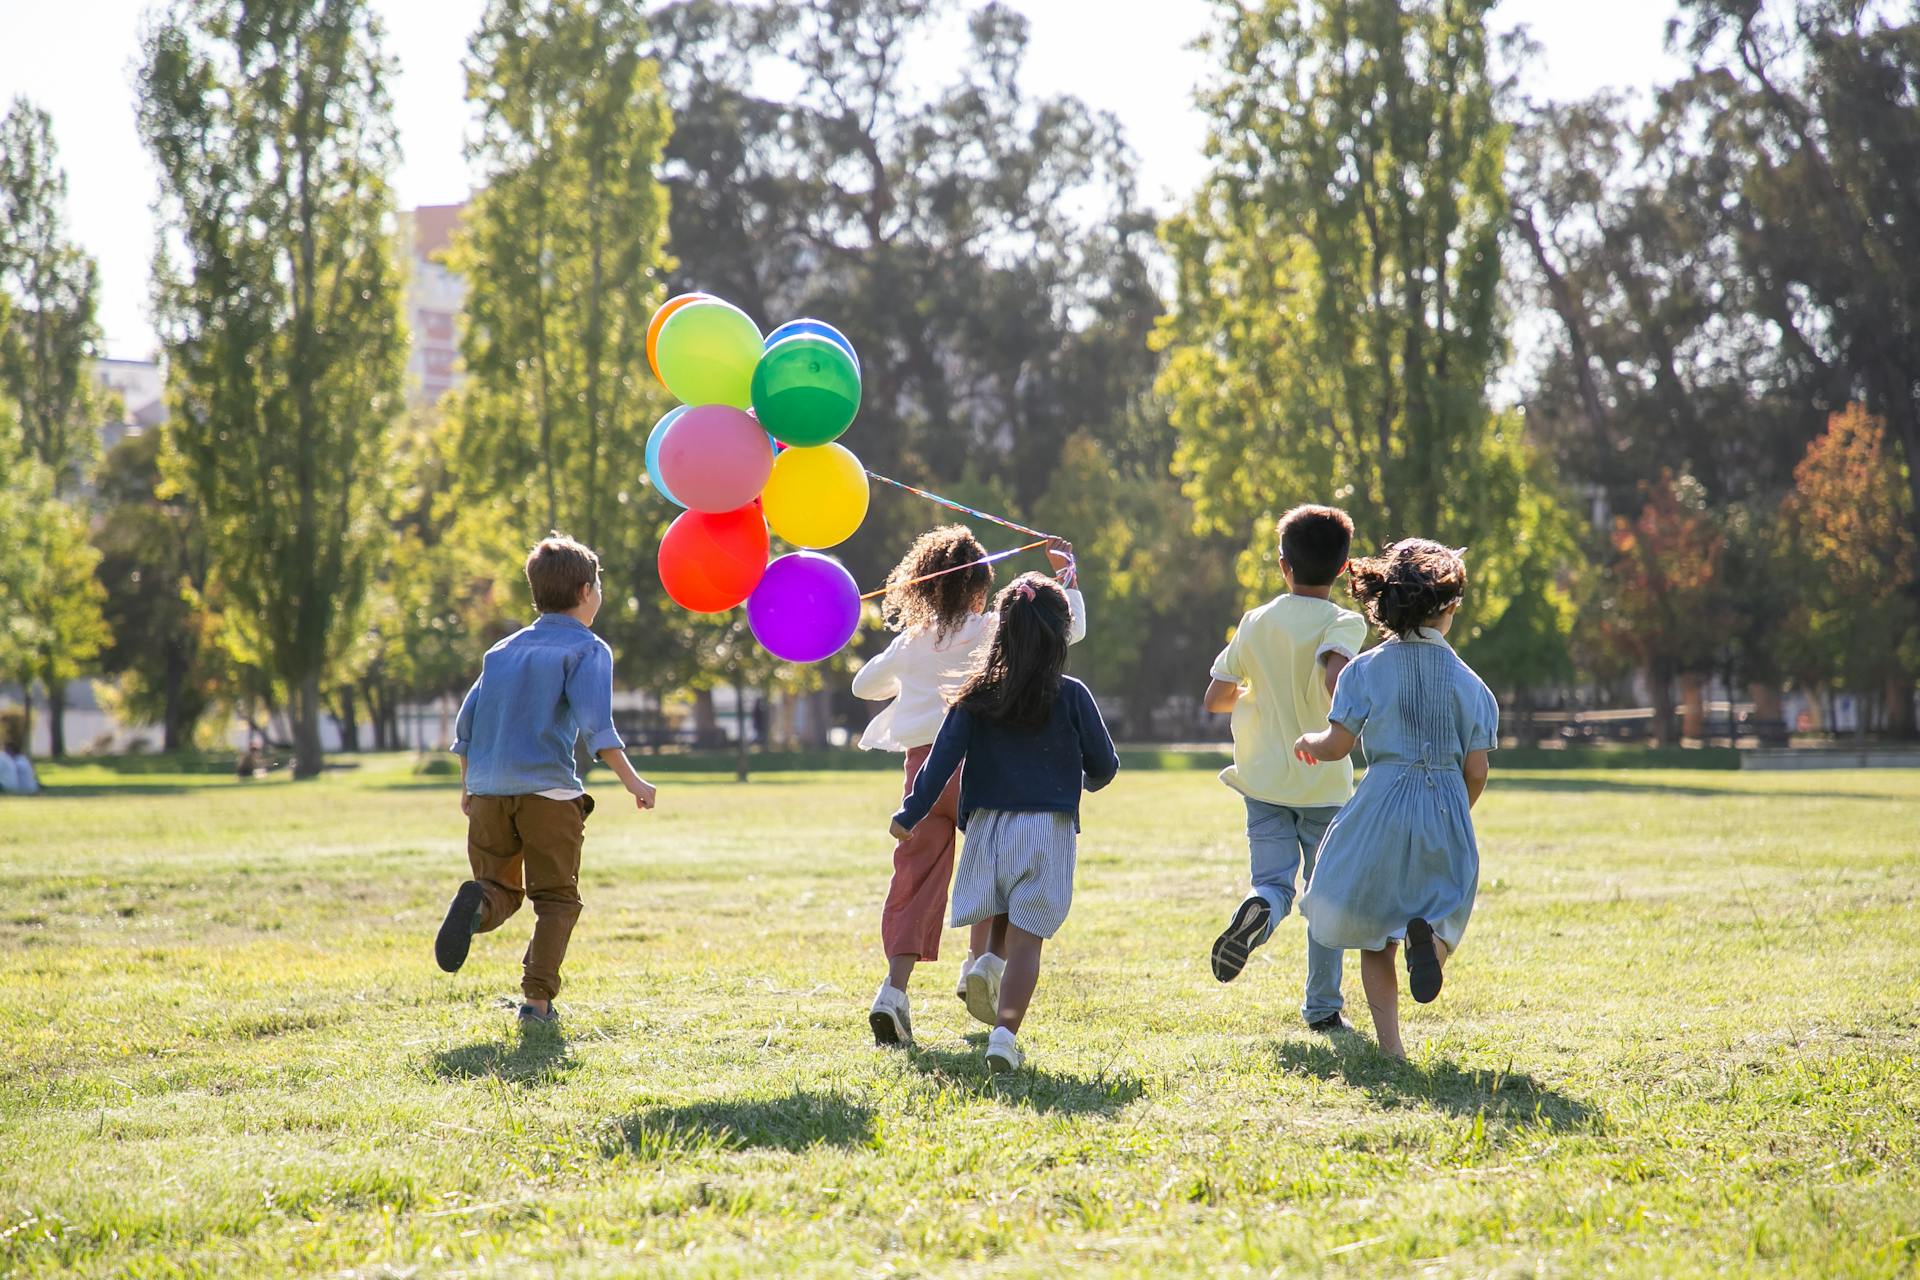 Children playing with balloons in a park | Source: Pexels